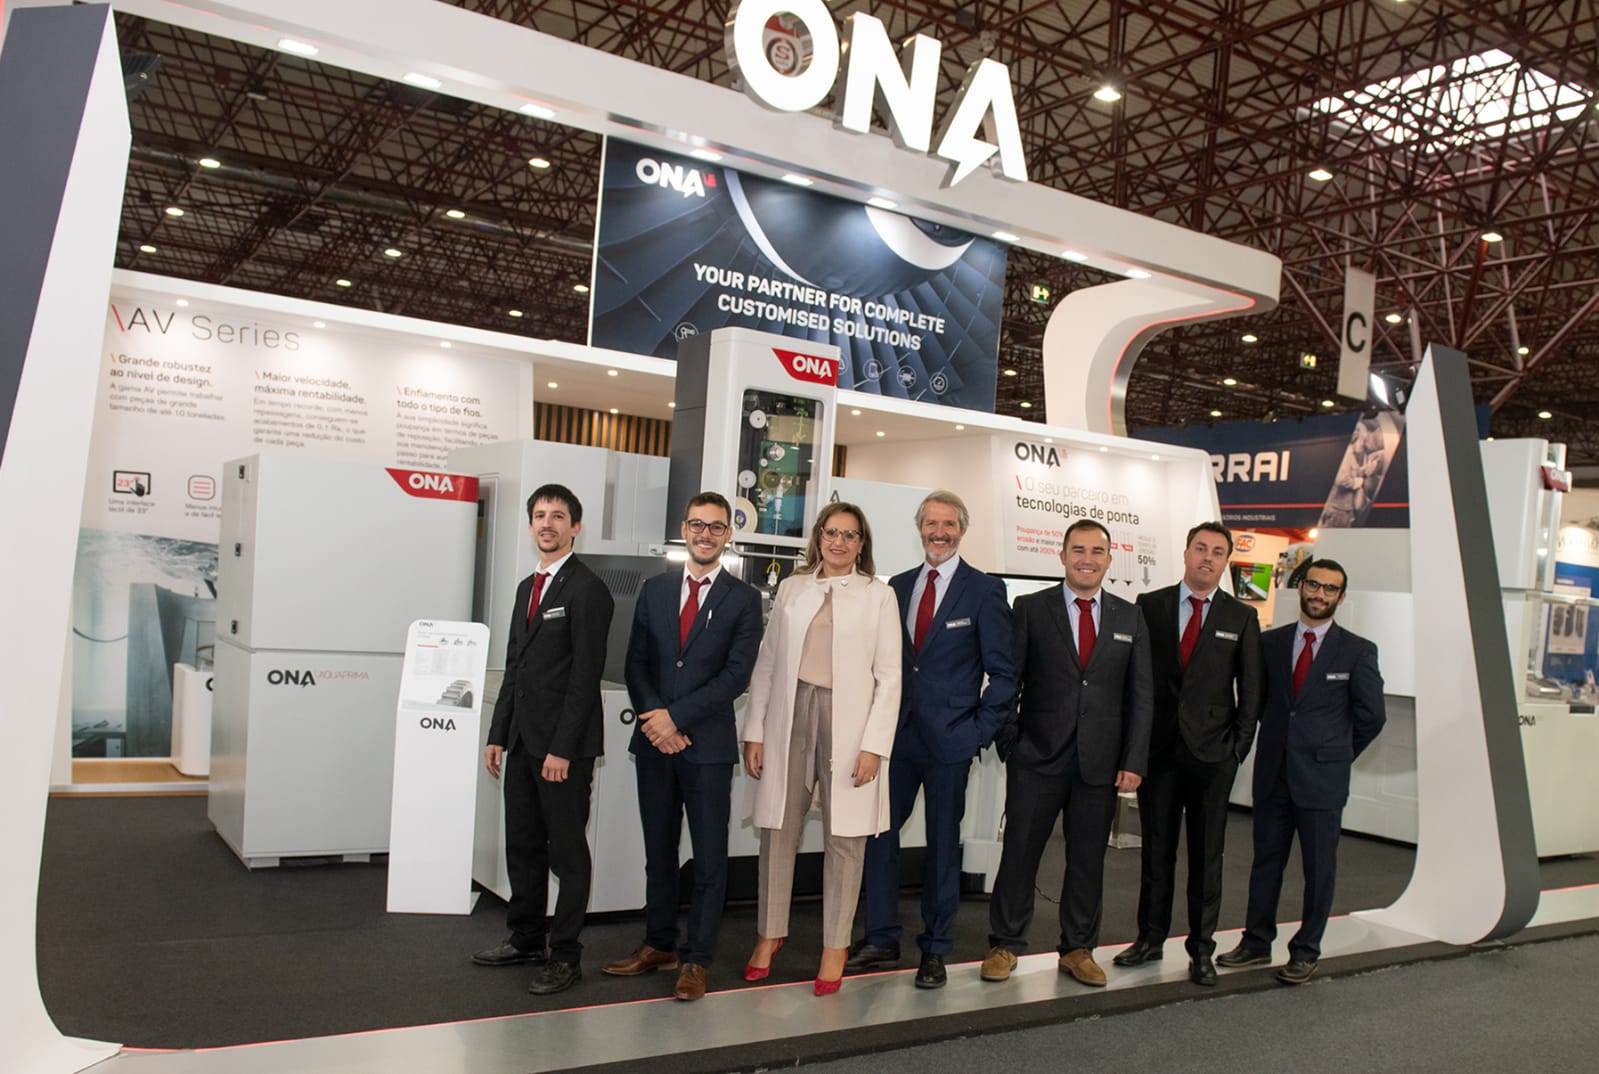 ONA will exhibit all of its technological potential in INDUSTRY 4.0. at EMAF 2018 